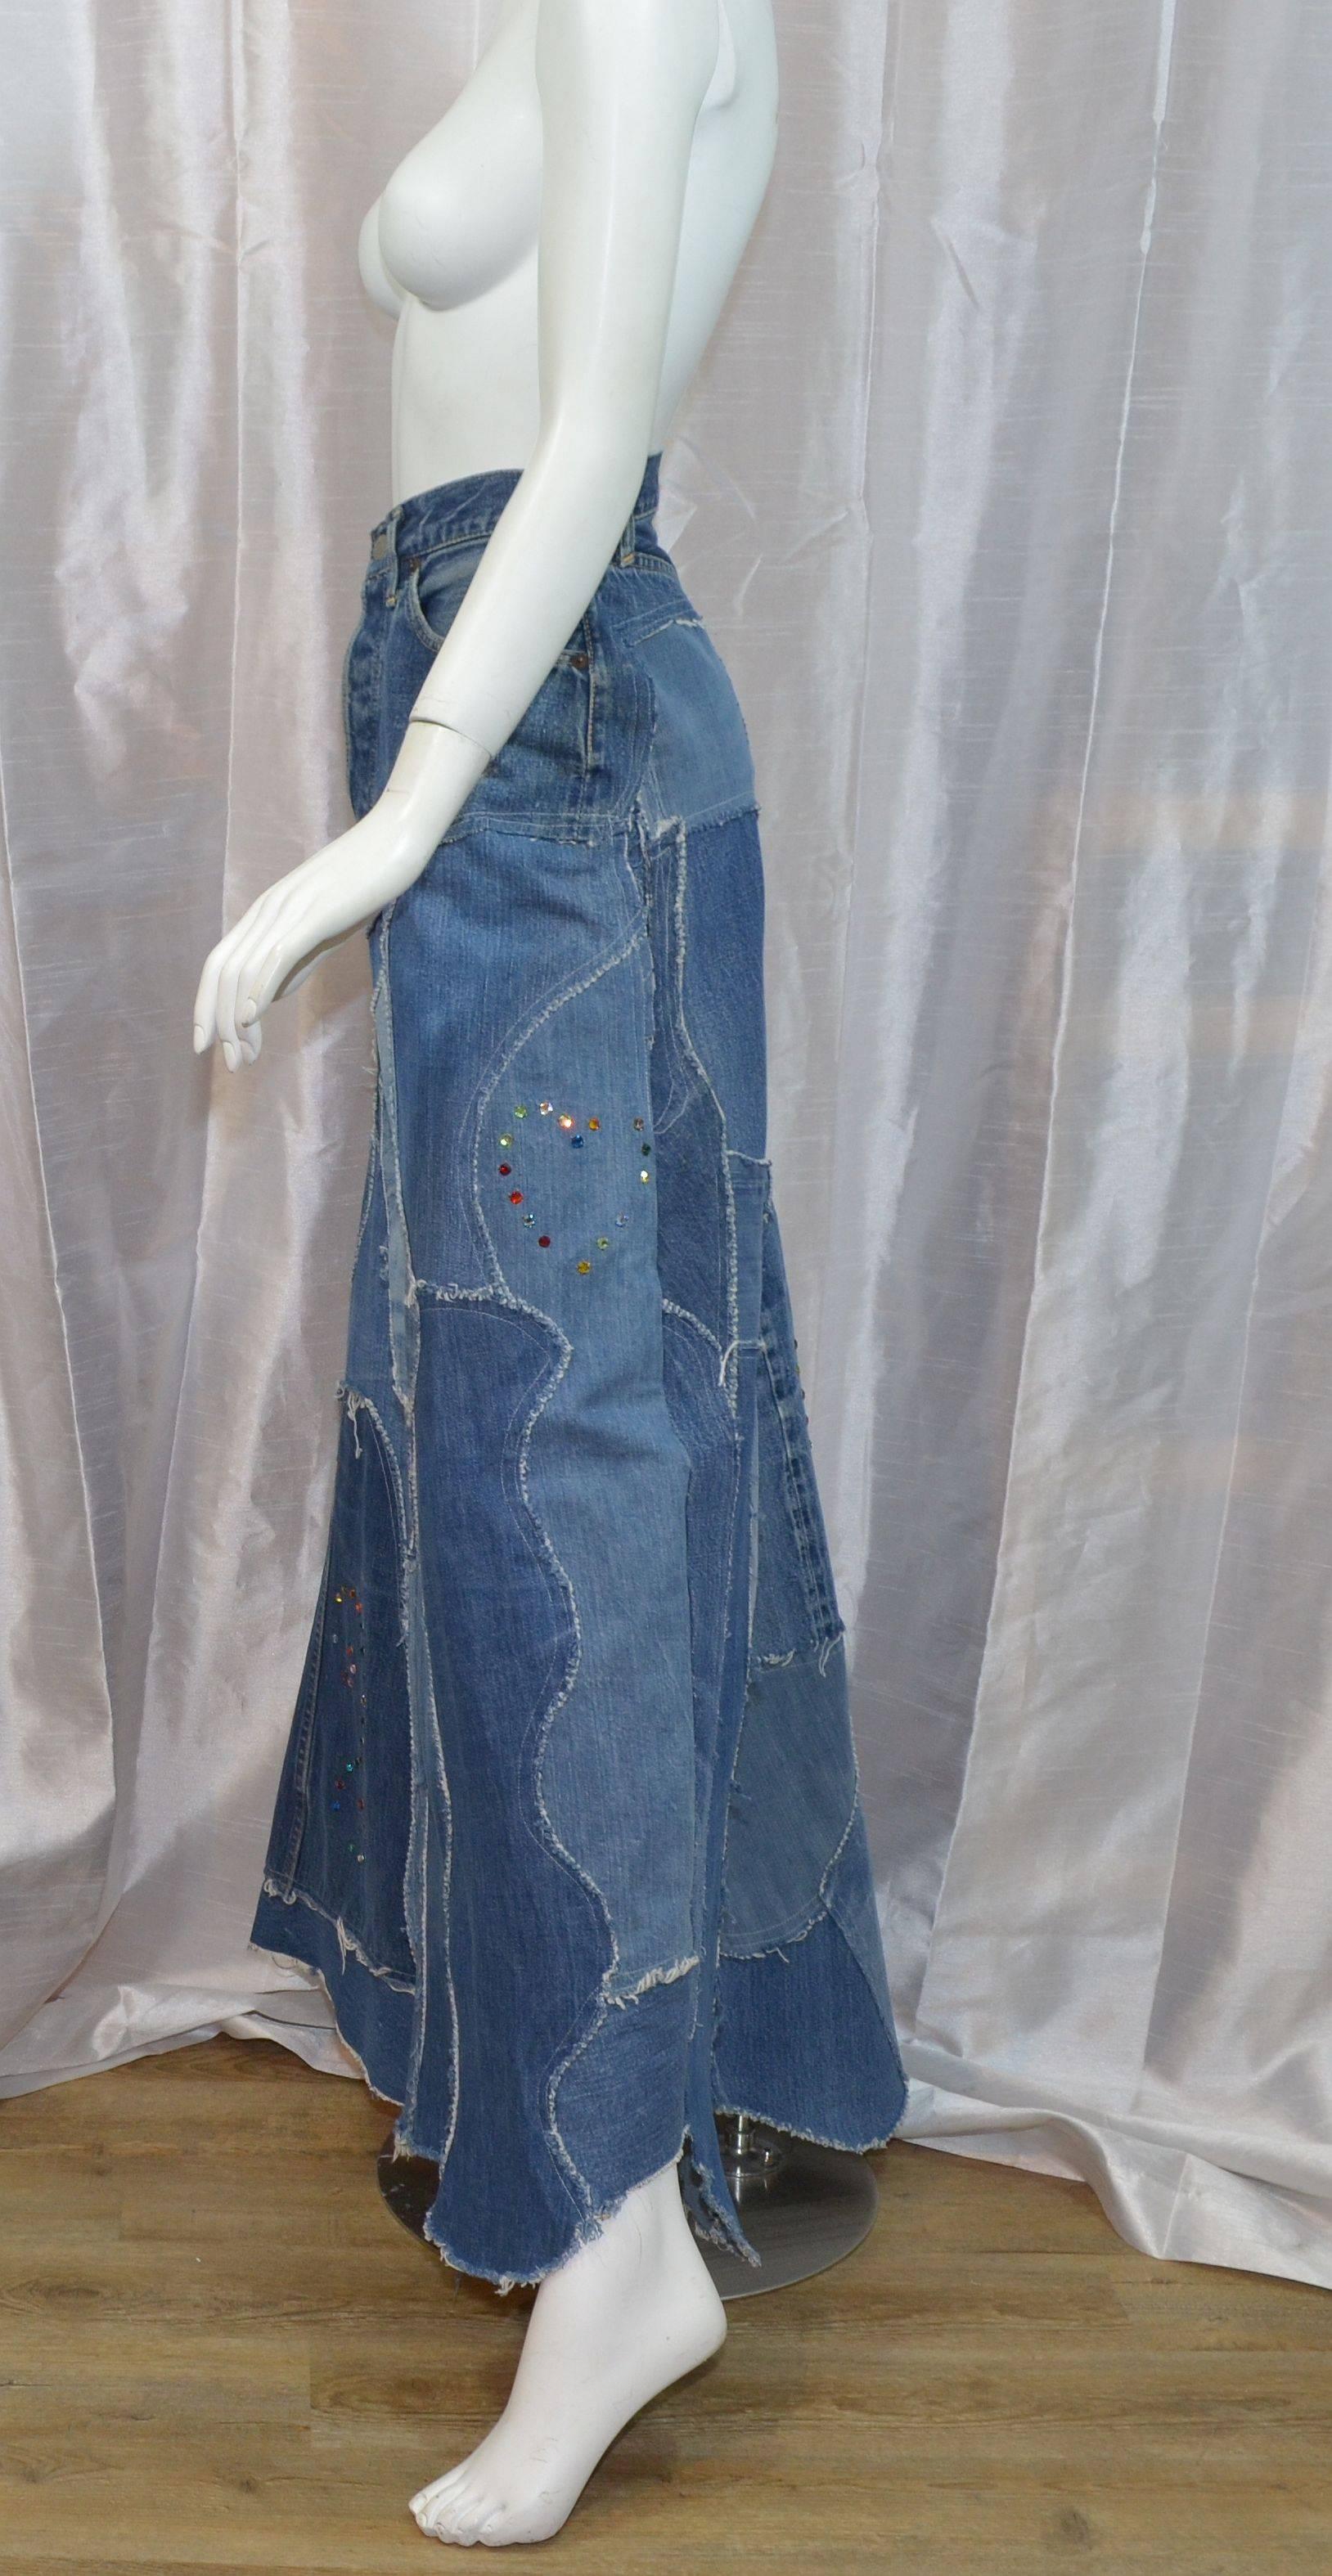 Funk and Flash Custom made original hippie maxi skirt made from Levis Big E denim skirt has five button closures along the front, three pockets at the waist, and multi-colored rhinestone embellishments throughout. Patchwork denim. Measurements: